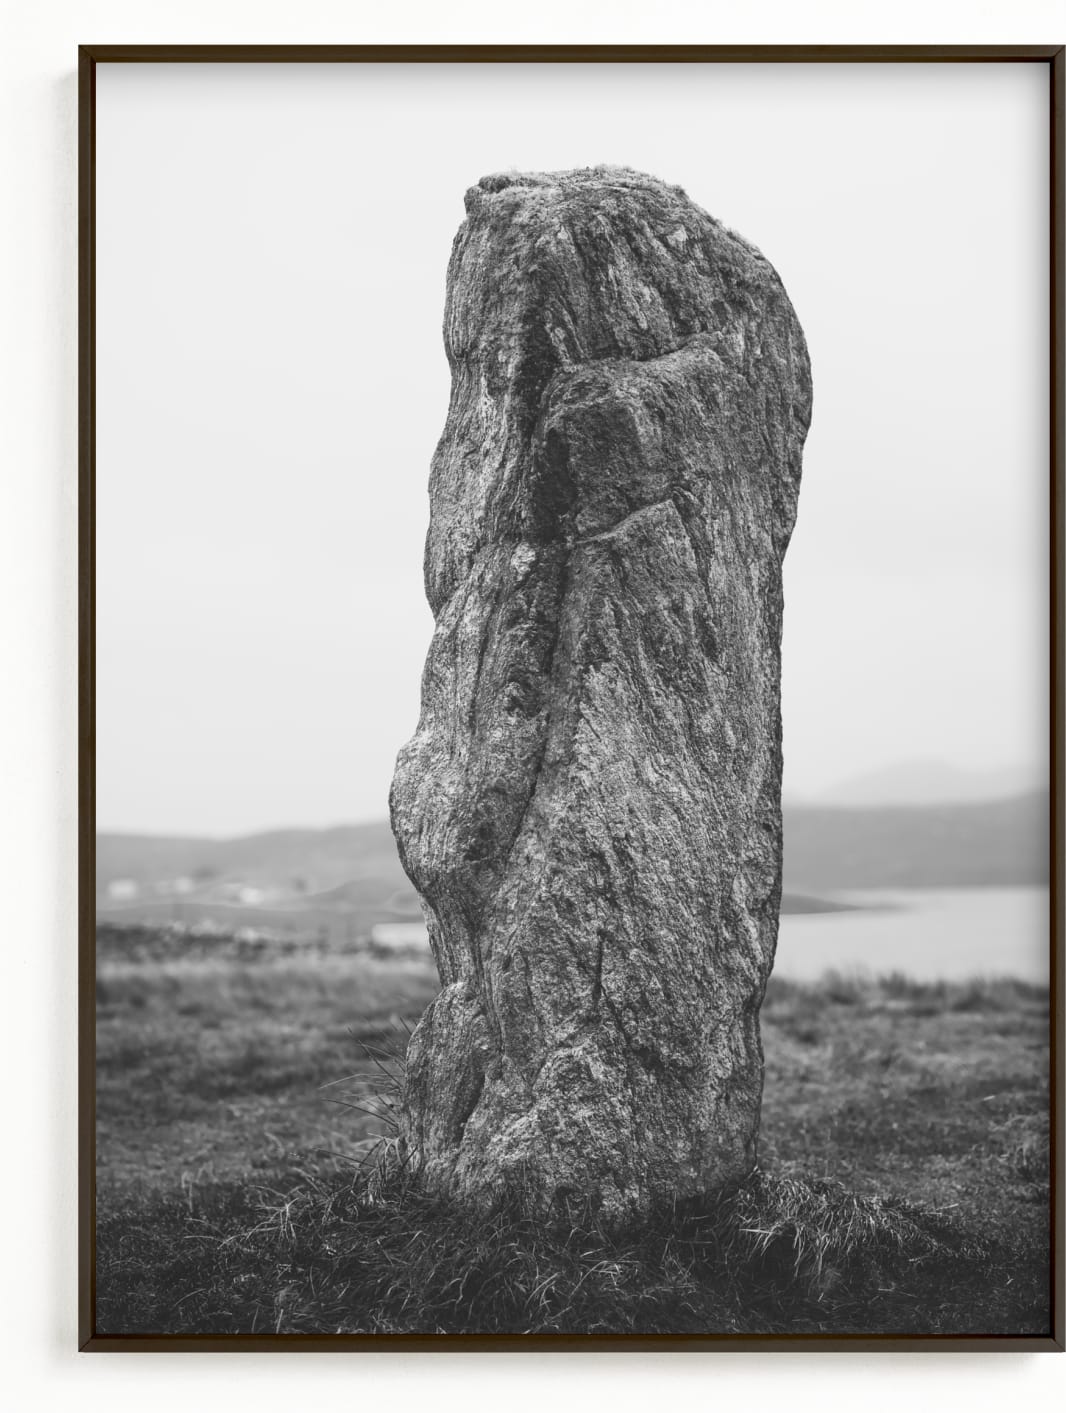 This is a black and white art by Kamala Nahas called Standing Stones III.